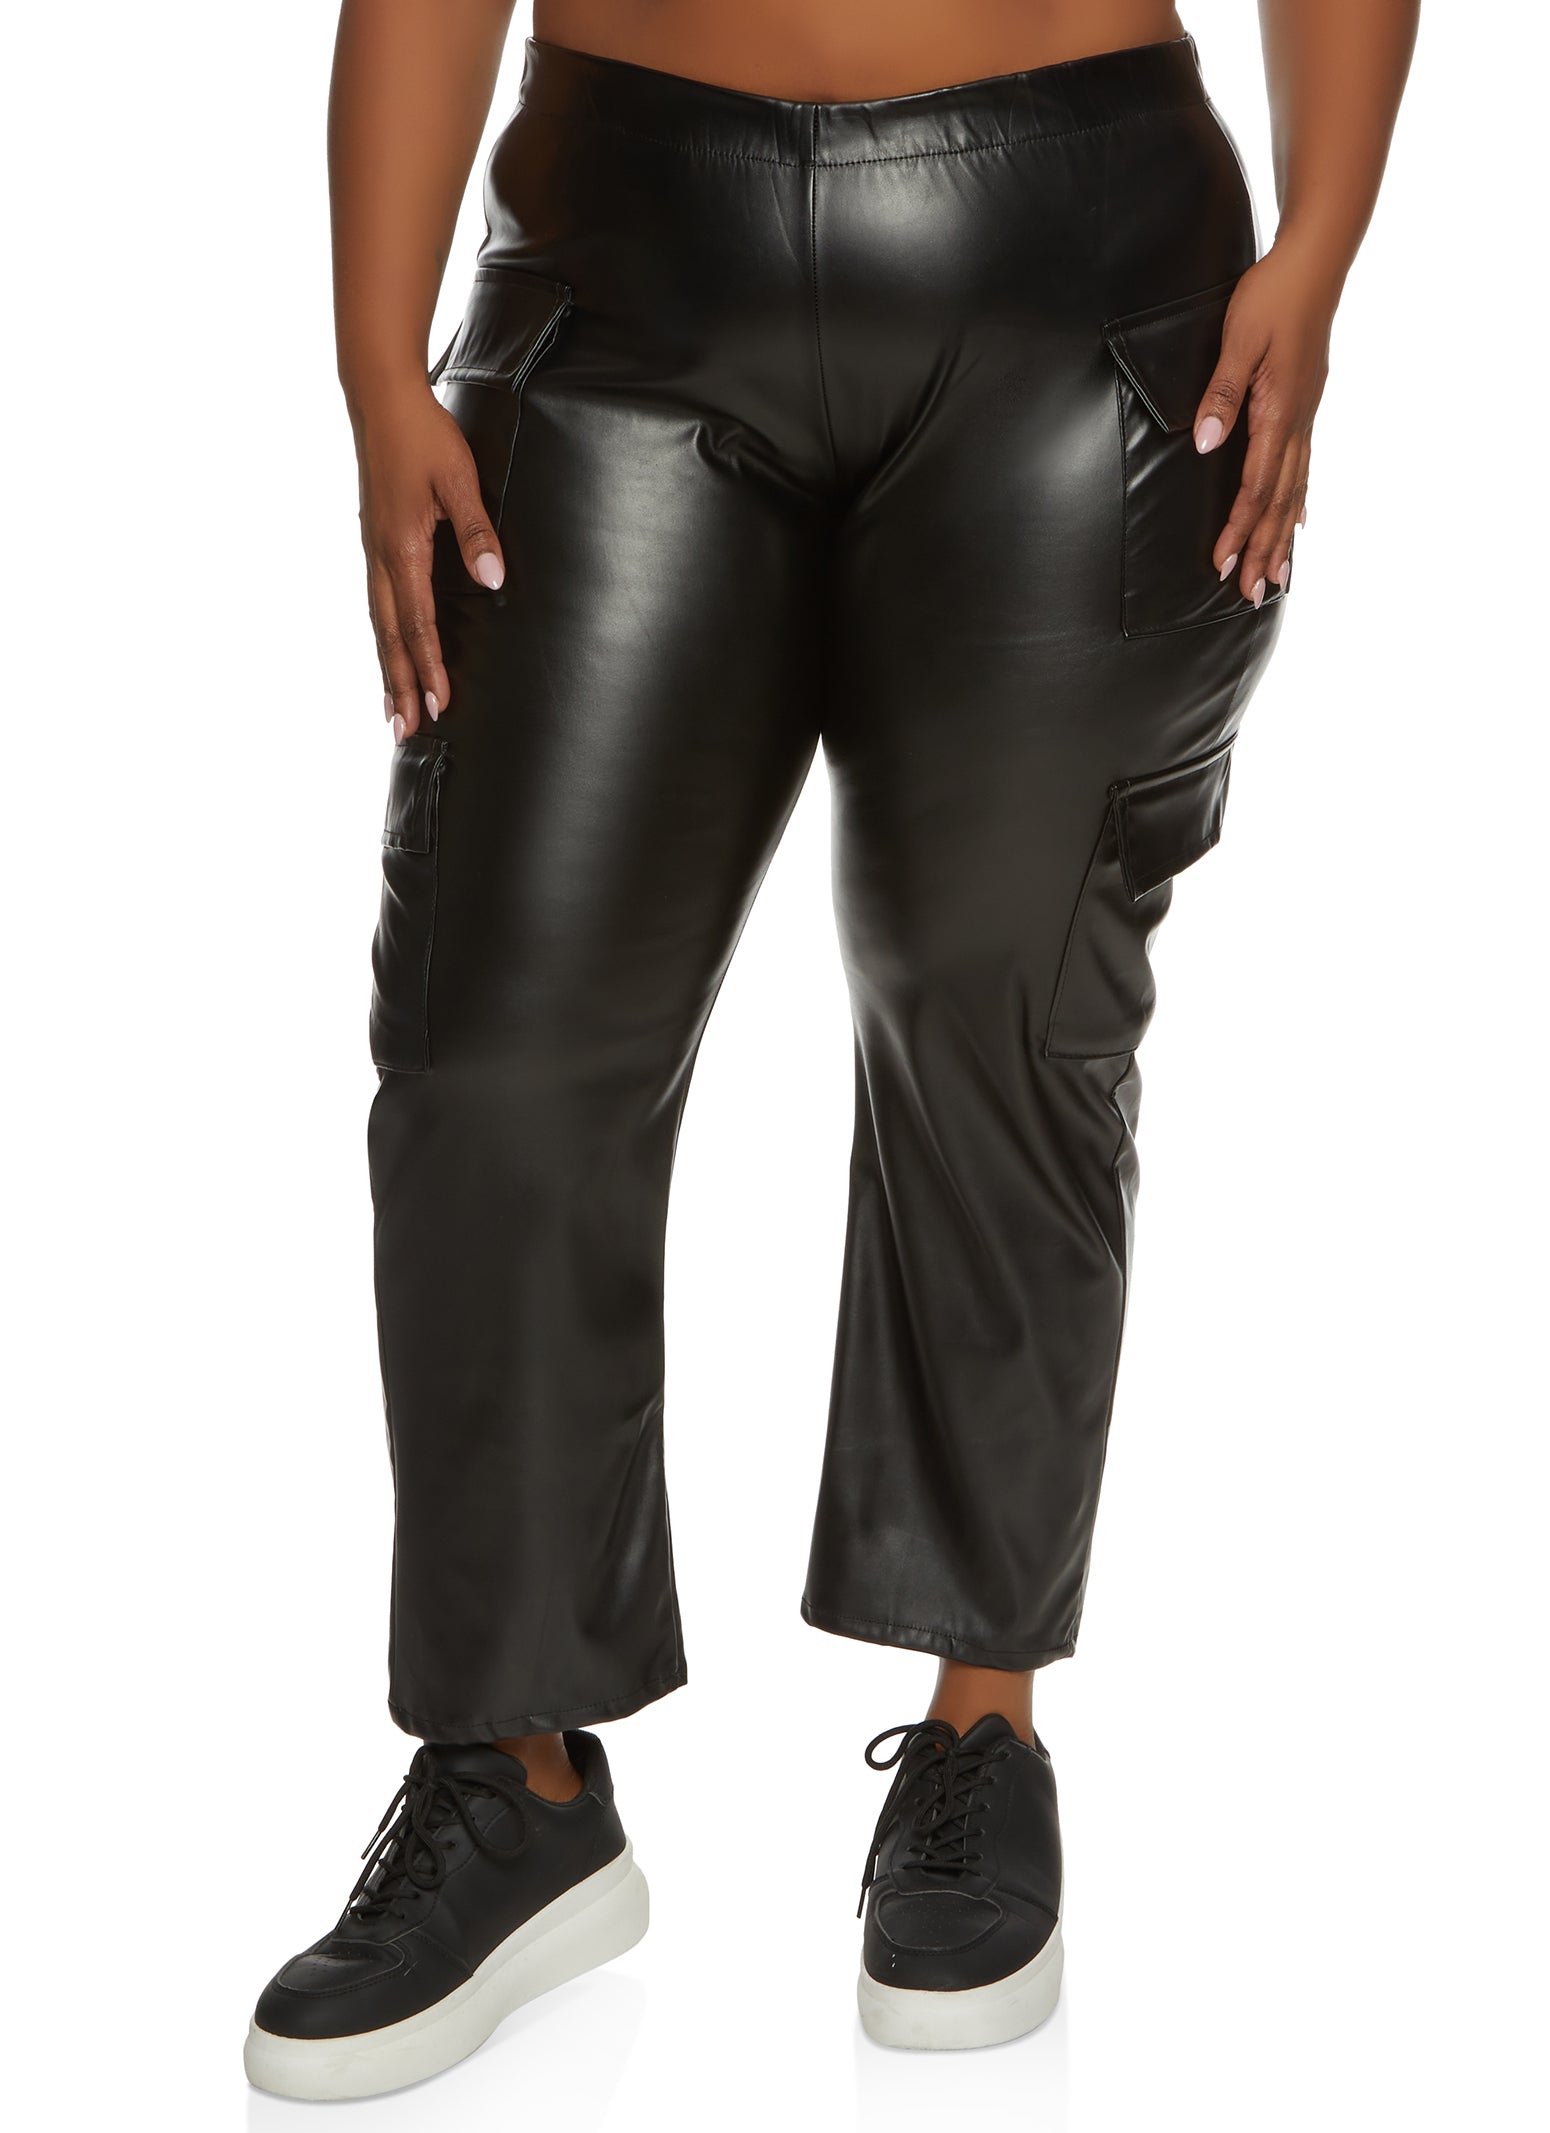 BUIgtTklOP Pants Women Plus Size High-waisted Leather Pants With Four-sided  Bottoms 